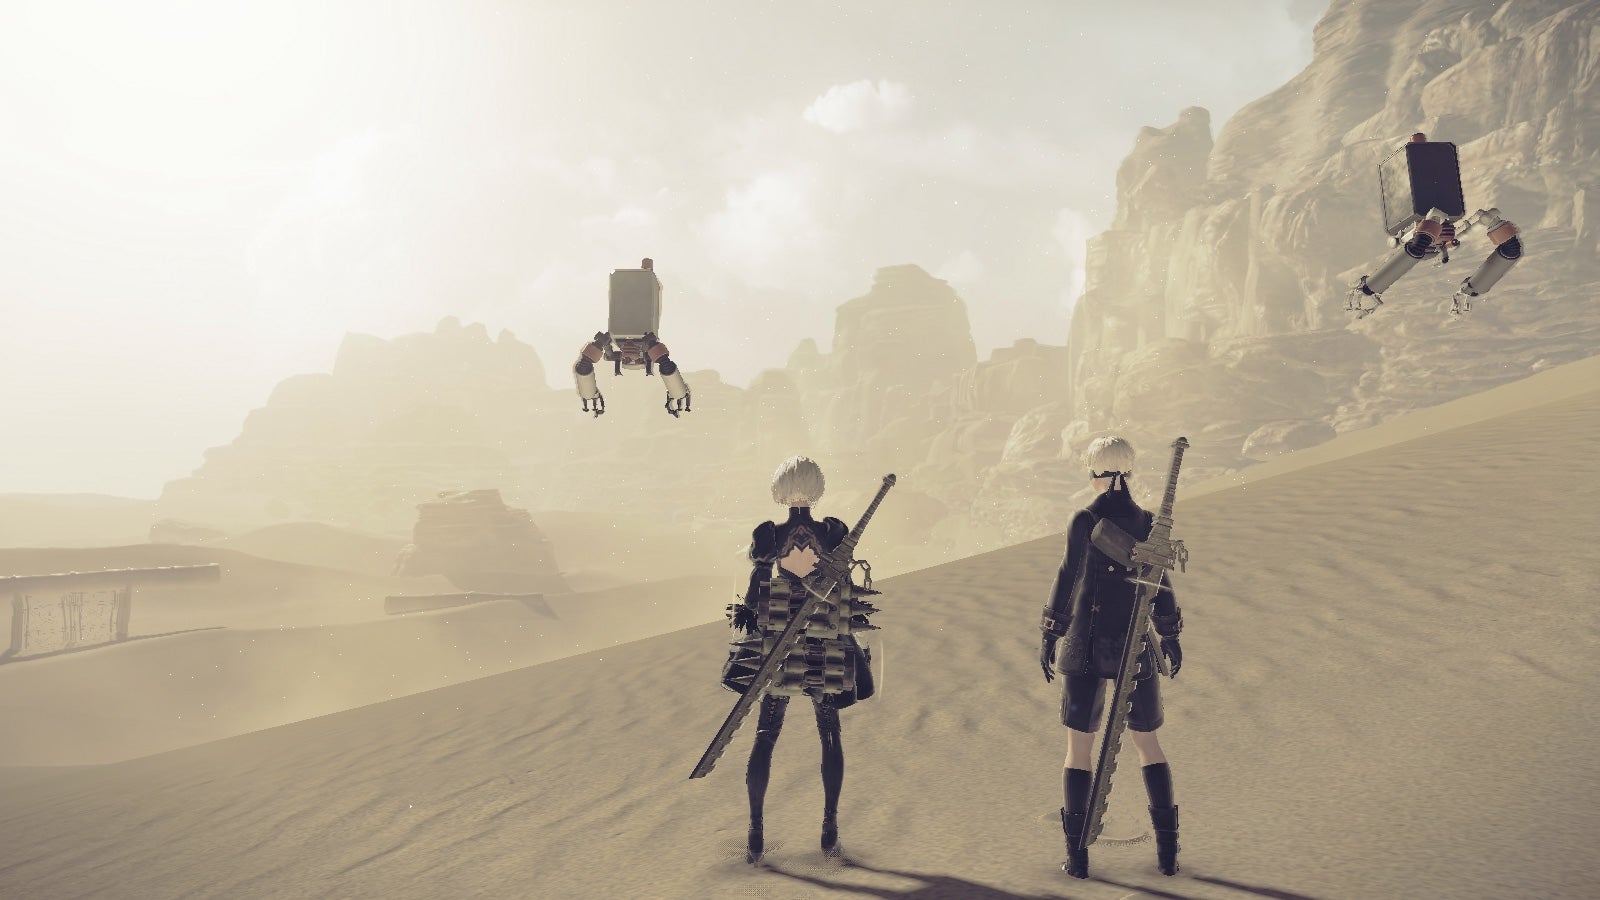 With One Final Death, Nier: Automata’s Ending Redefines The Meaning Of Life